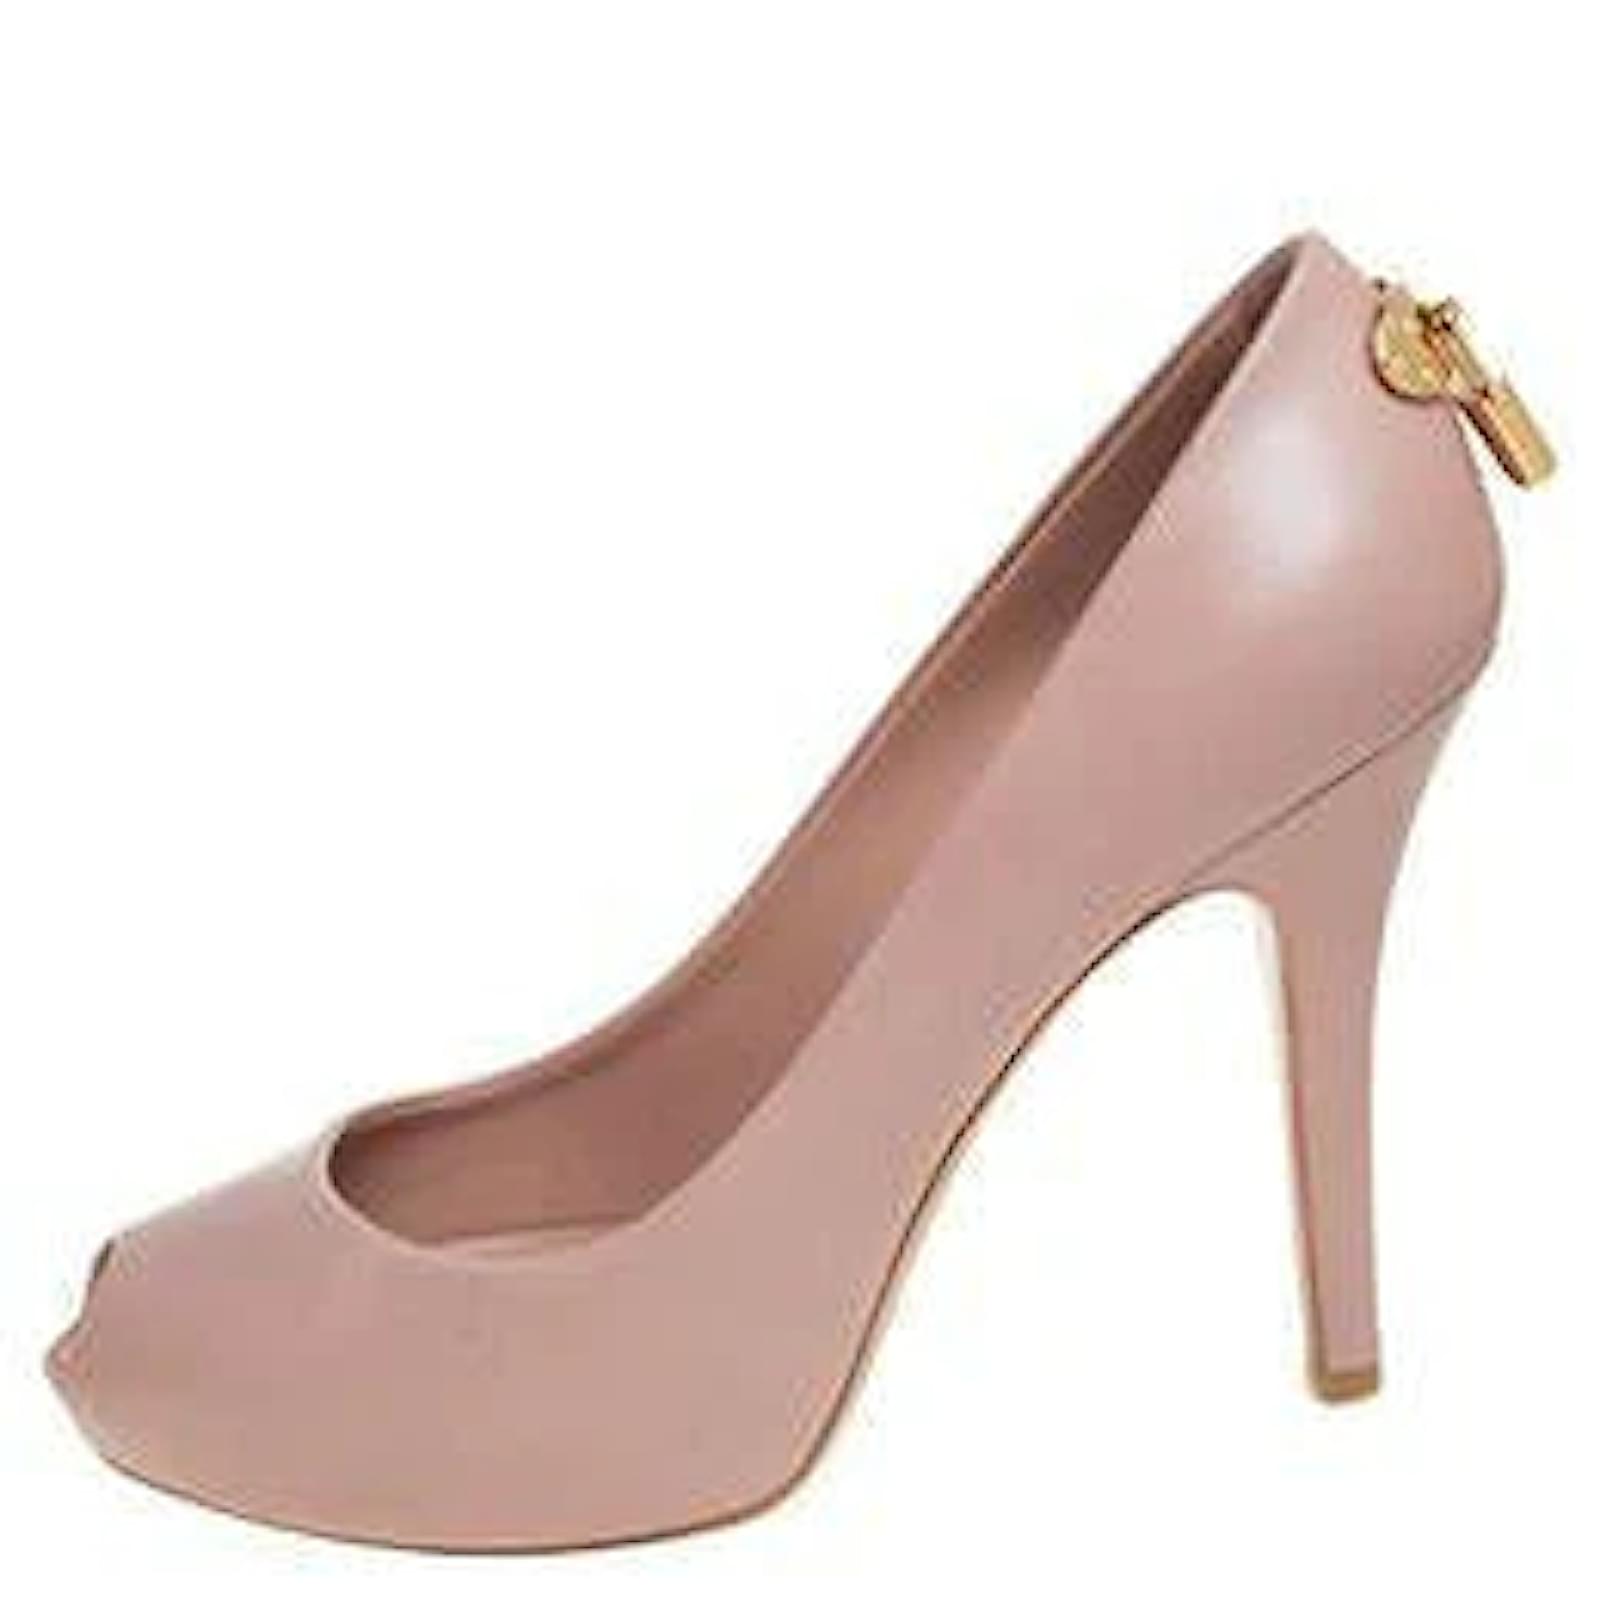 Louis Vuitton Beige Glitter Patent Leather Oh Really! Peep Toe